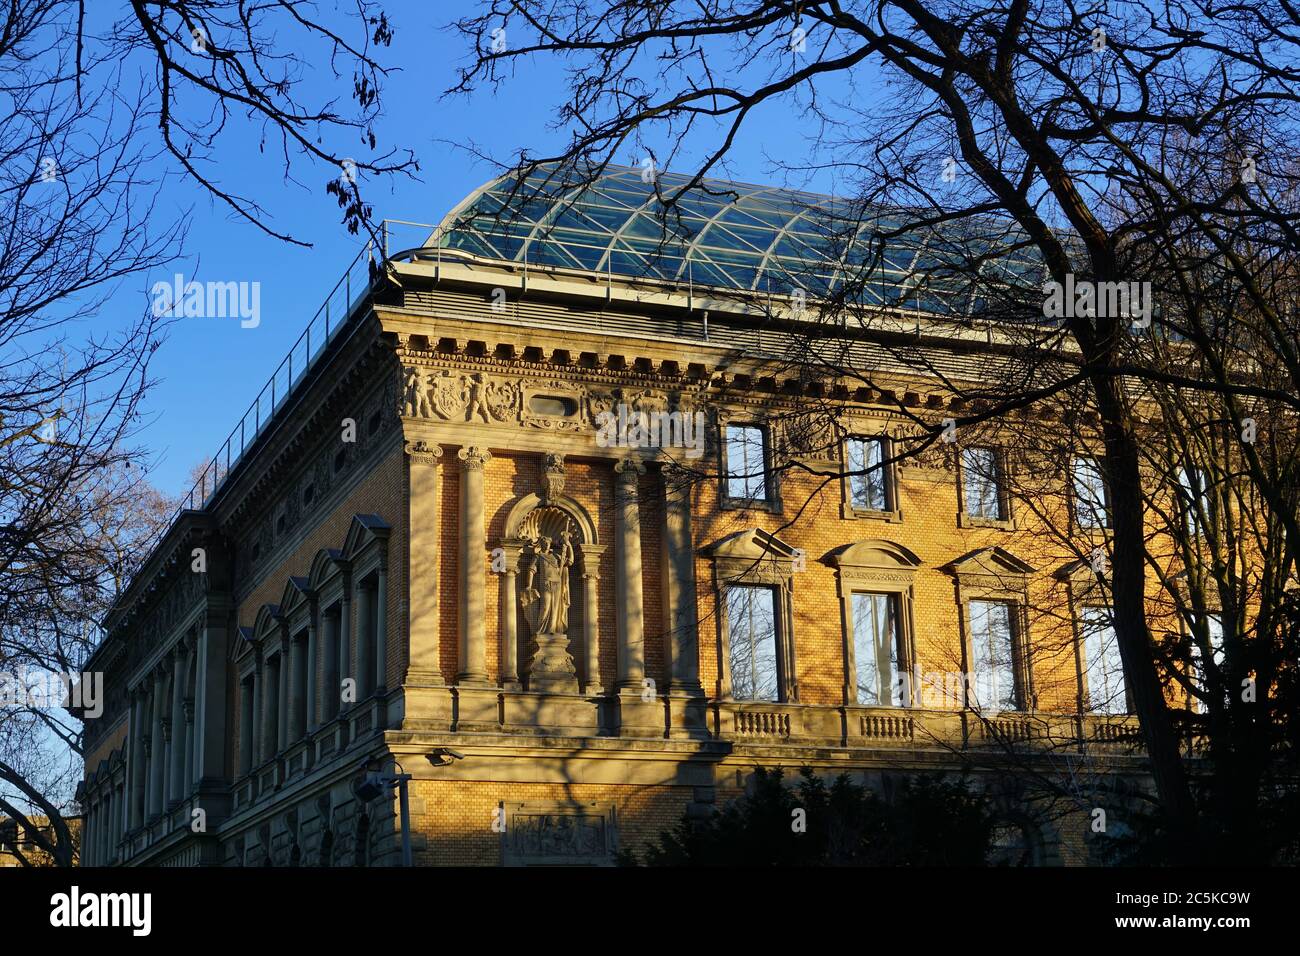 „Ständehaus“, built 1876-1880. It served as a State Parliament from 1949-1988. In 2002, it was turned into the K21 Kunstmuseum for contemporary art. Stock Photo